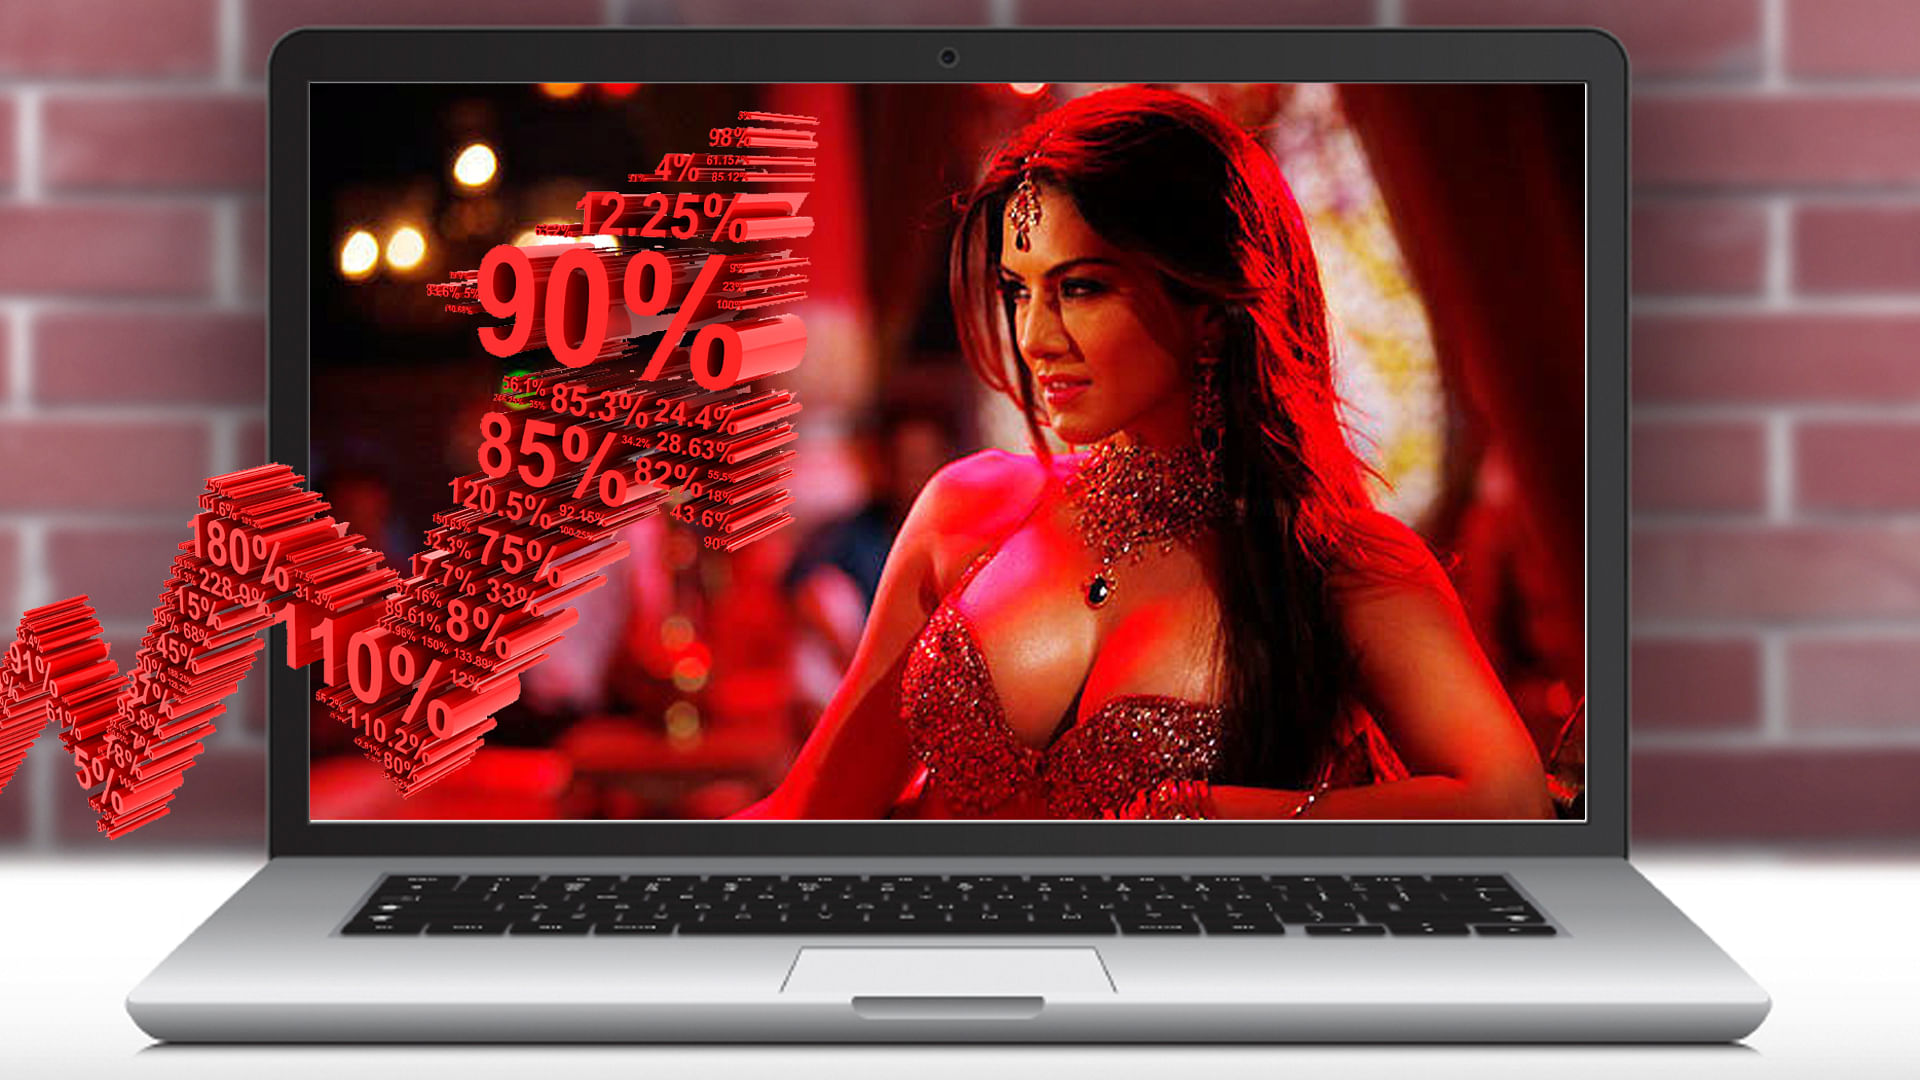 The ban of pornographic websites in India has worked in a way possibly unimagined by the policy makers. (Photo: iStock)